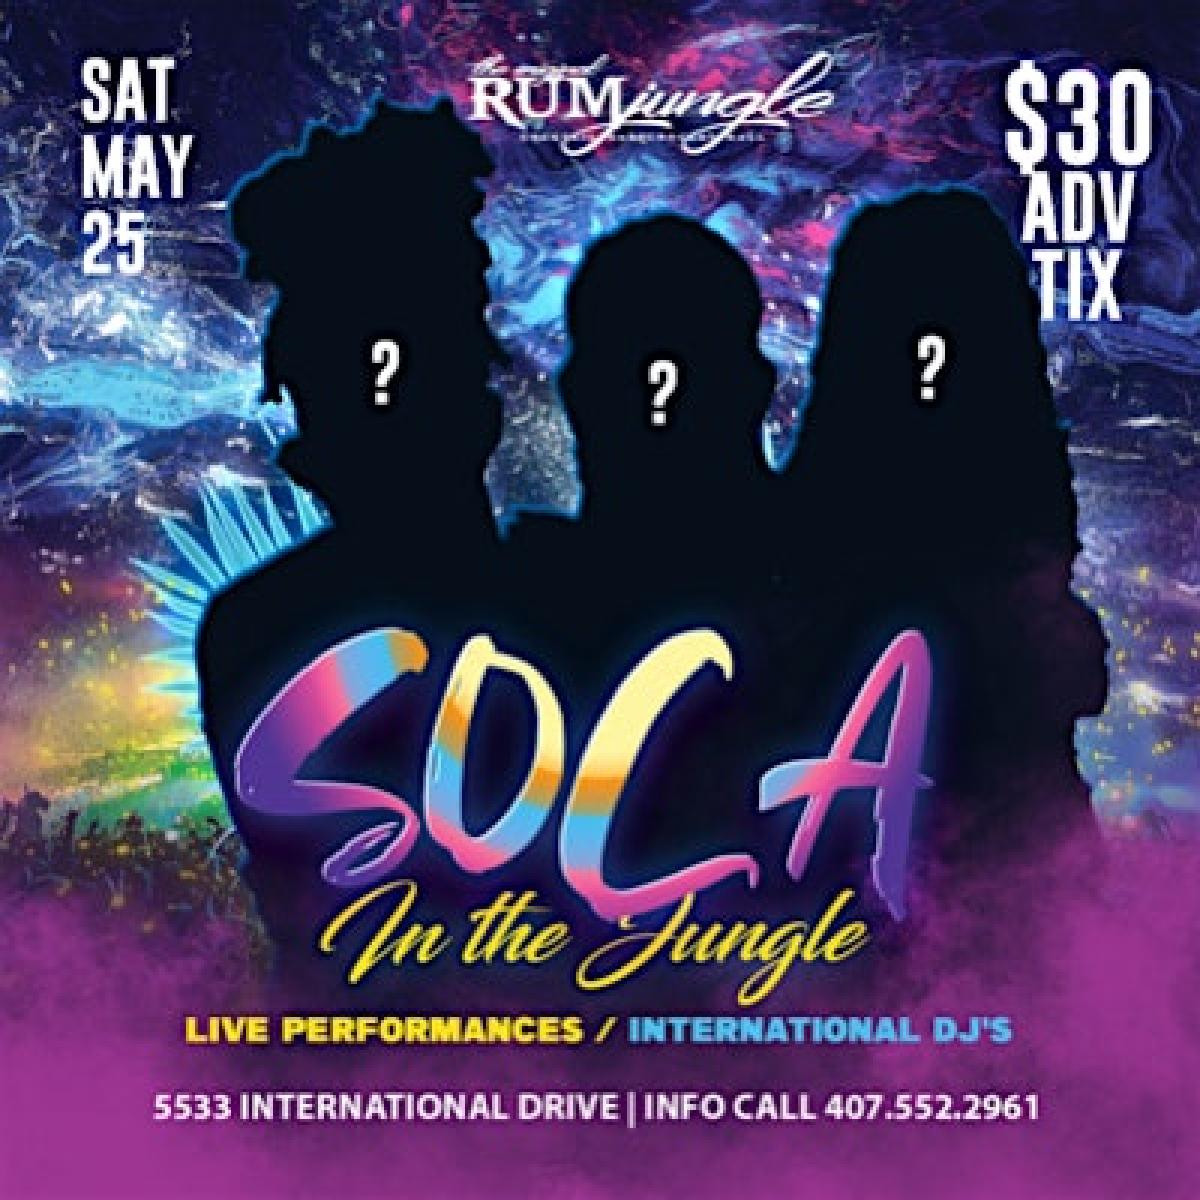 Soca In The Jungle flyer or graphic.